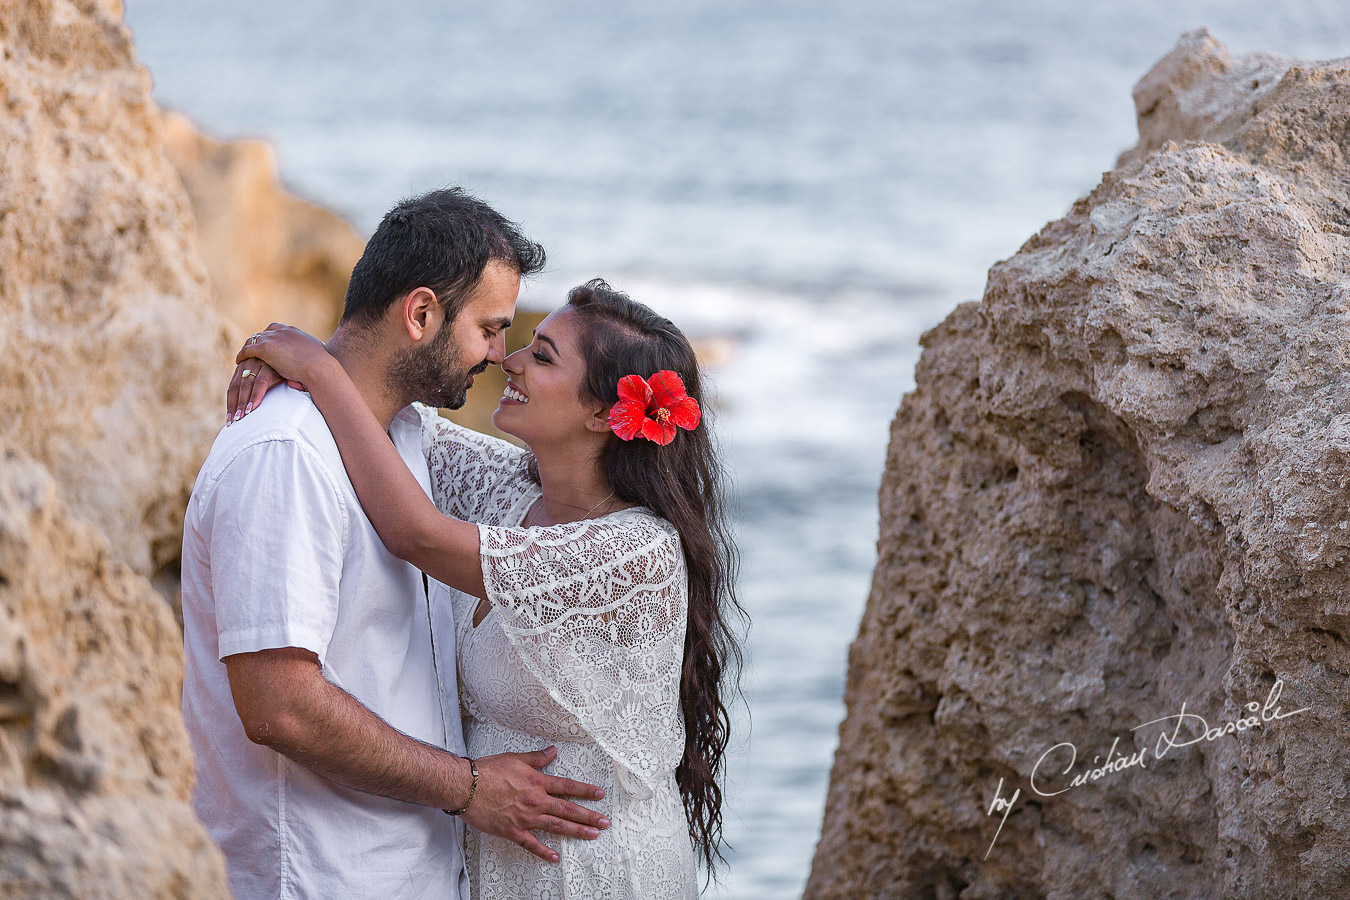 Beautiful Sucheta photogrpahed together with Vikram at the luxurious King Evelthon Hotel in Paphos, Cyprus.